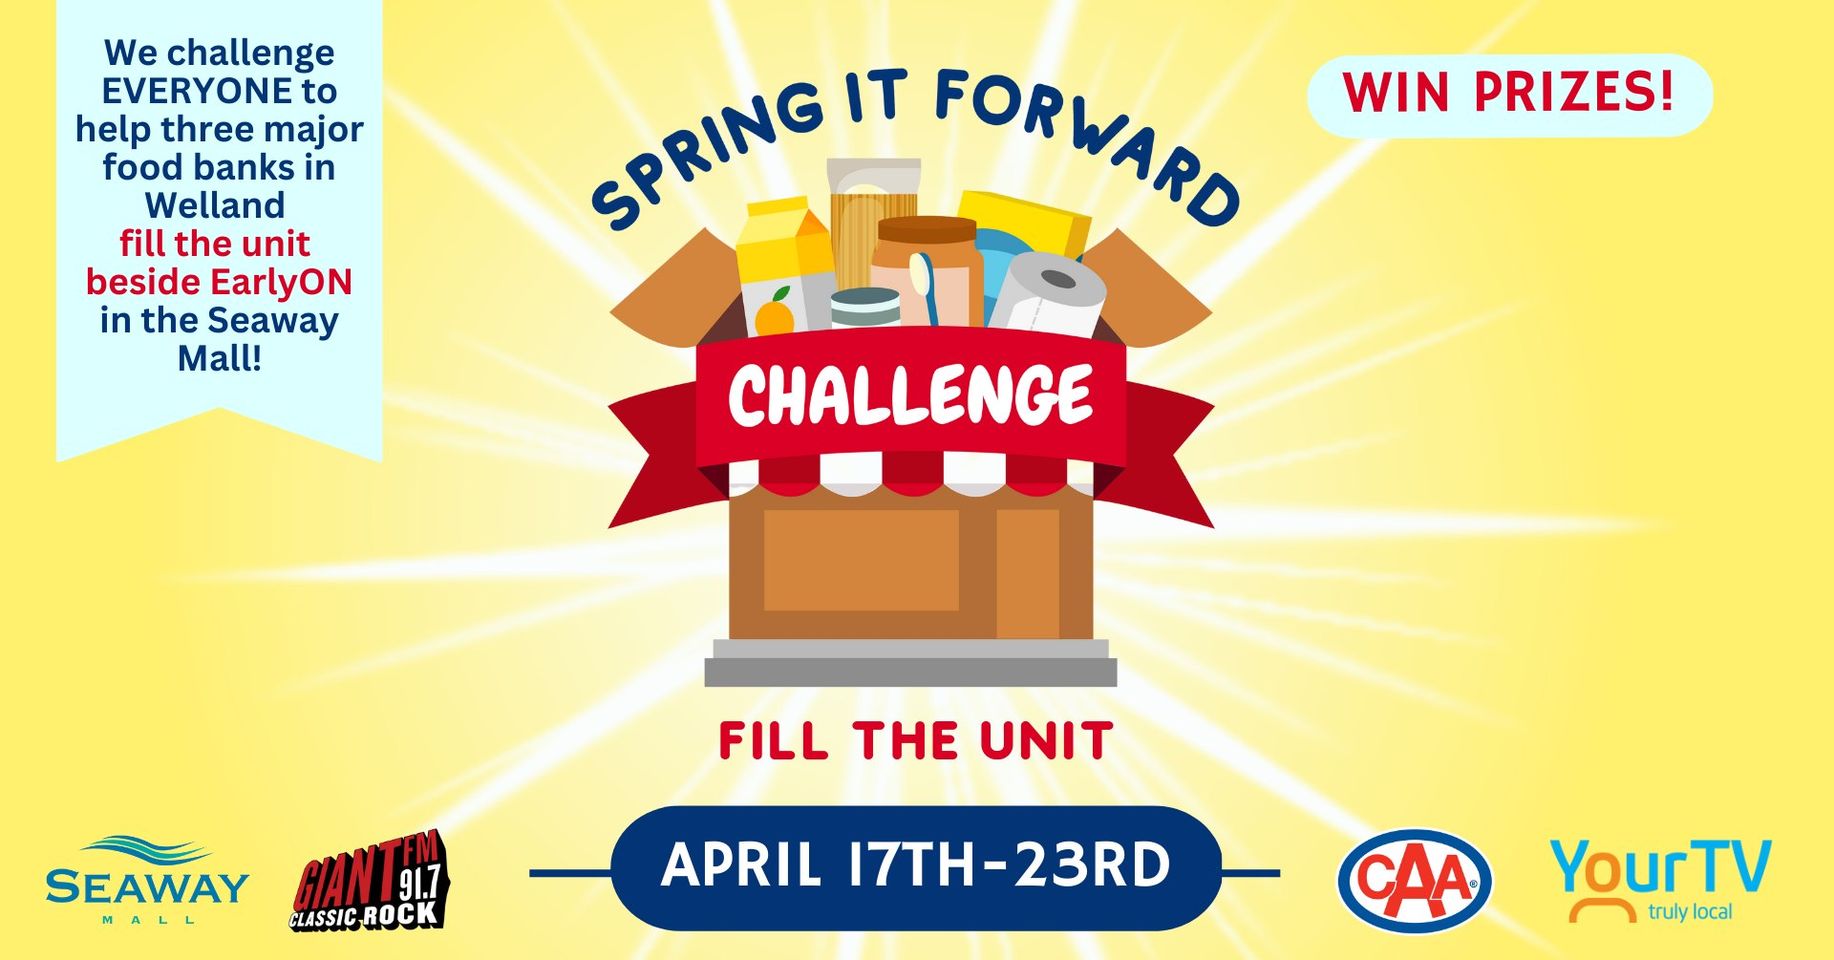 Join the Spring It Forward Community Challenge!